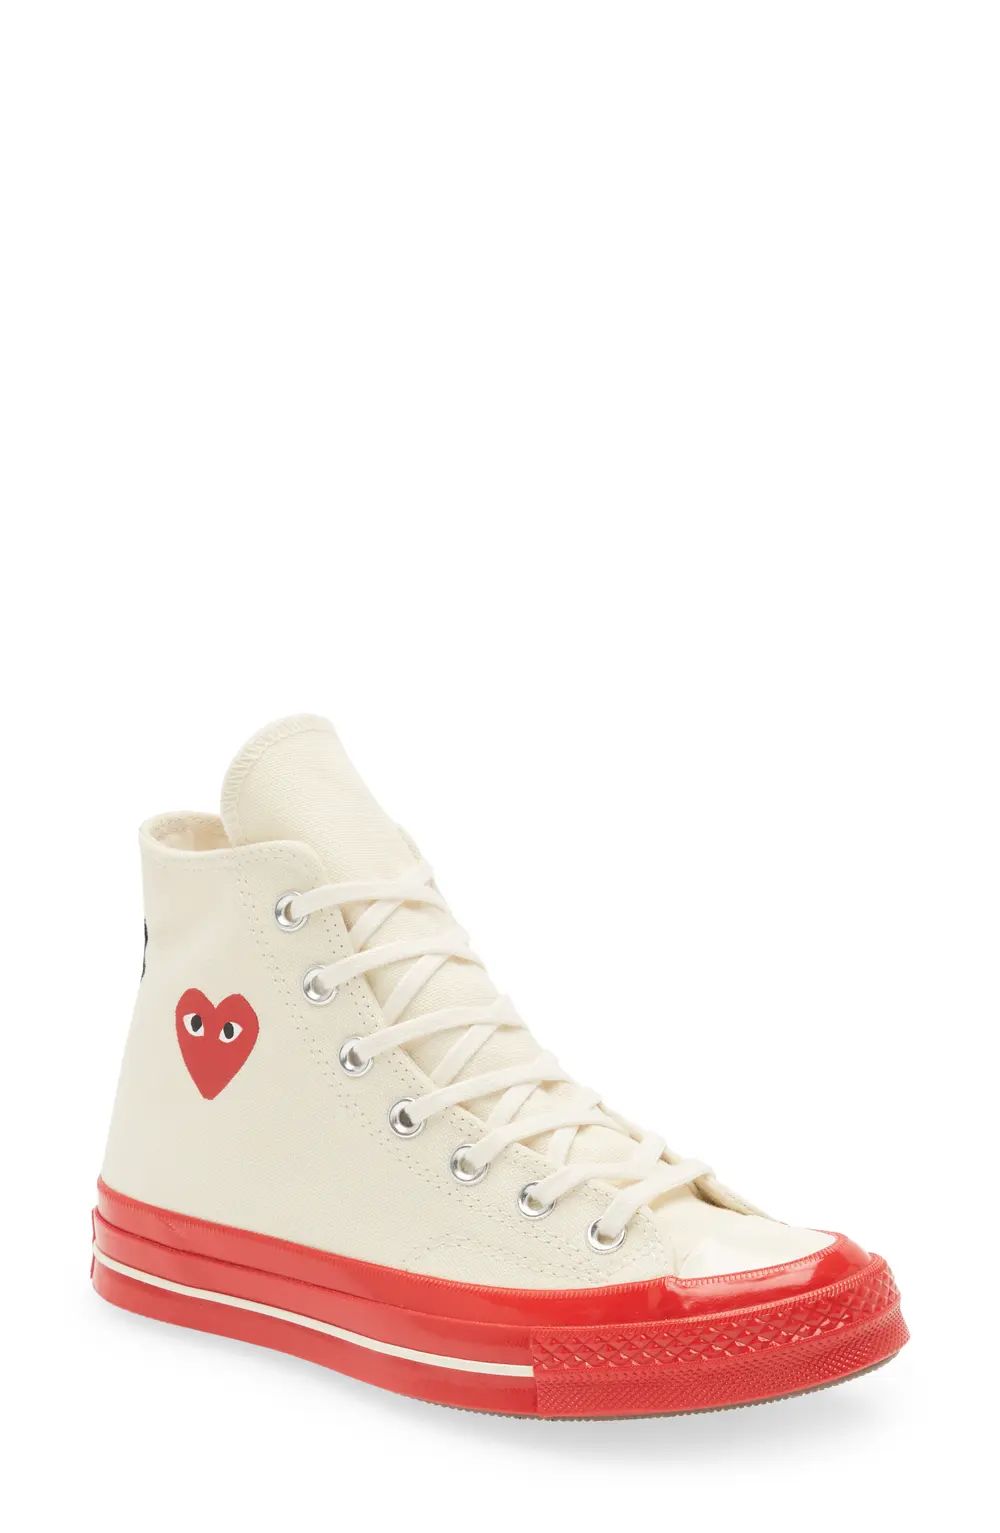 Comme des Garcons PLAY x Converse Chuck Taylor? Hidden Heart Red Sole High Top Sneaker, Size 10 Wome | Nordstrom Canada